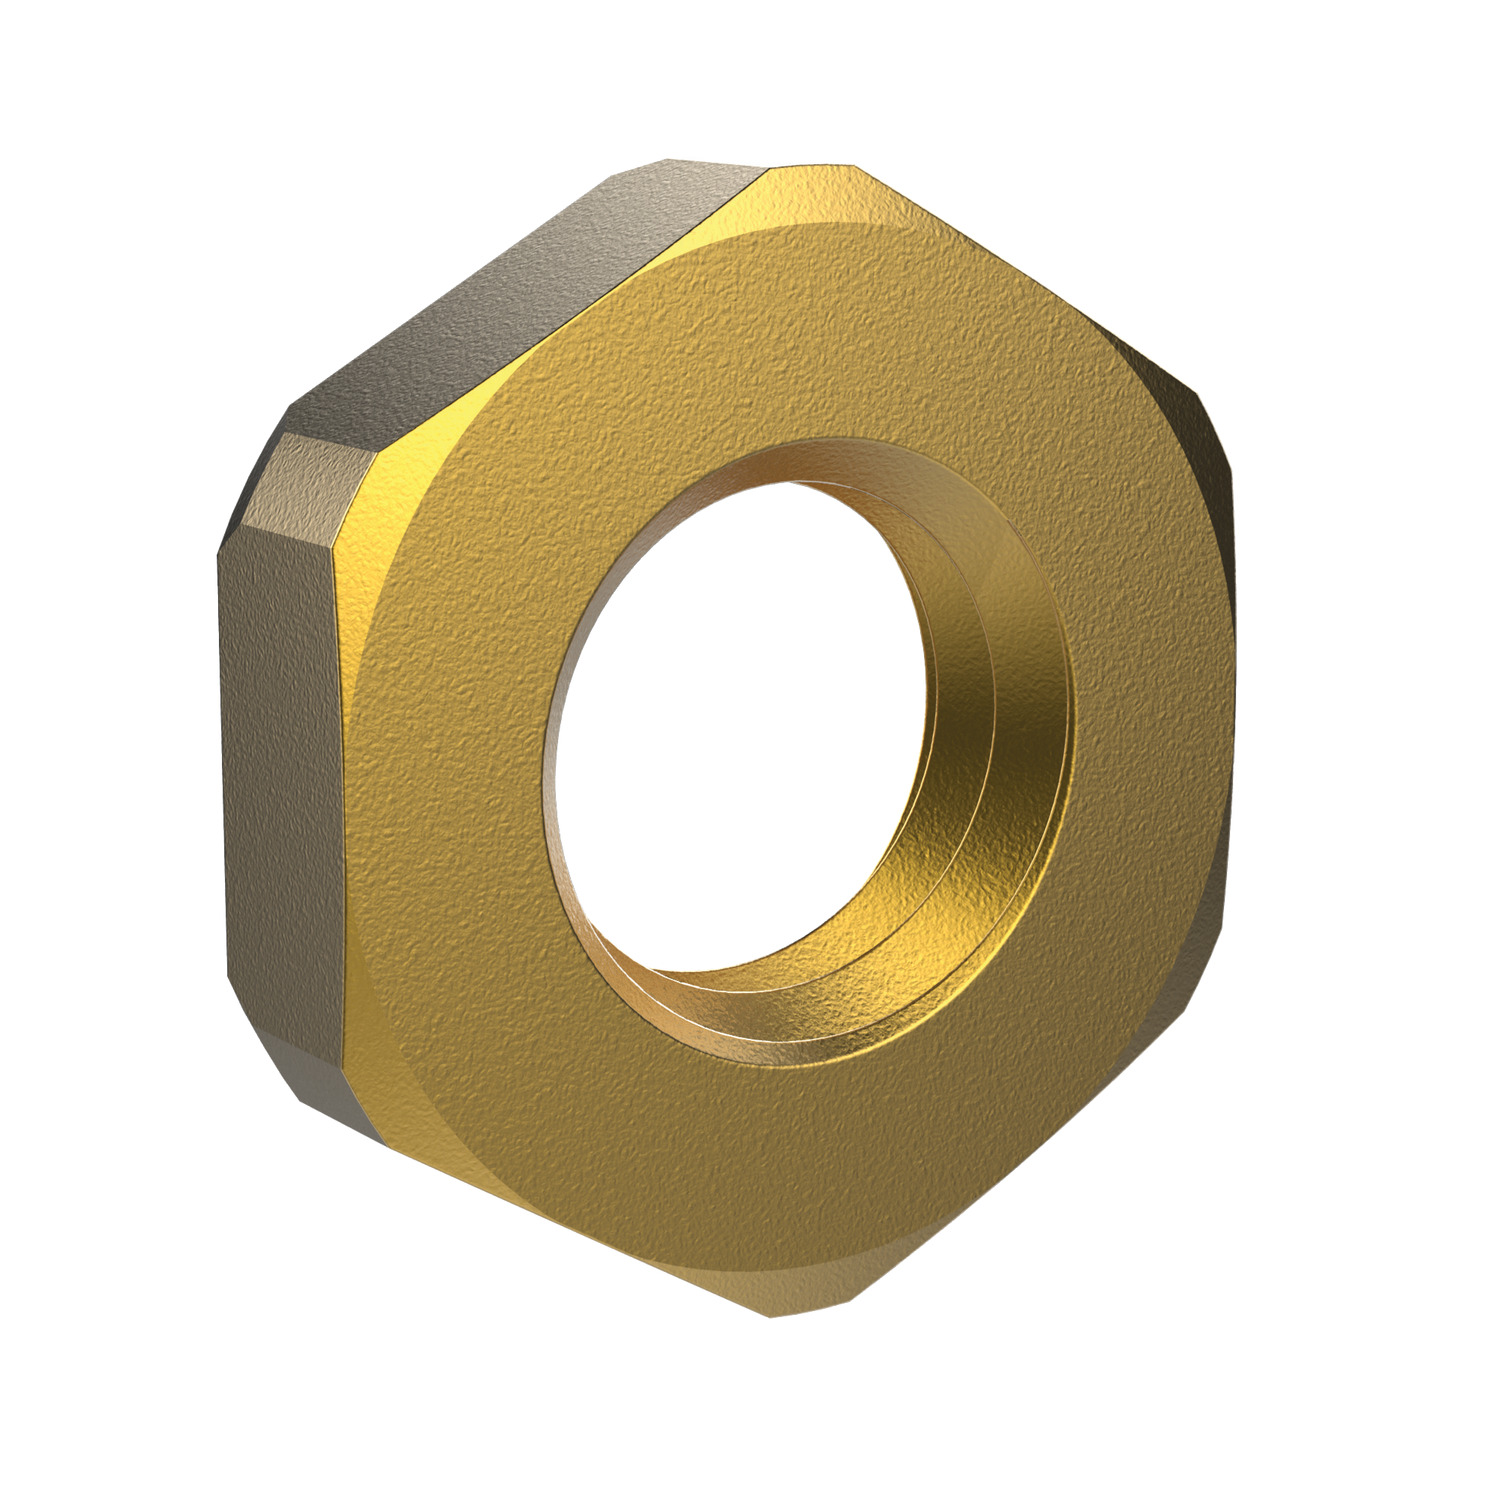 Product P0305.BR, Hexagon thin nuts unchamfered, DIN 439 / 